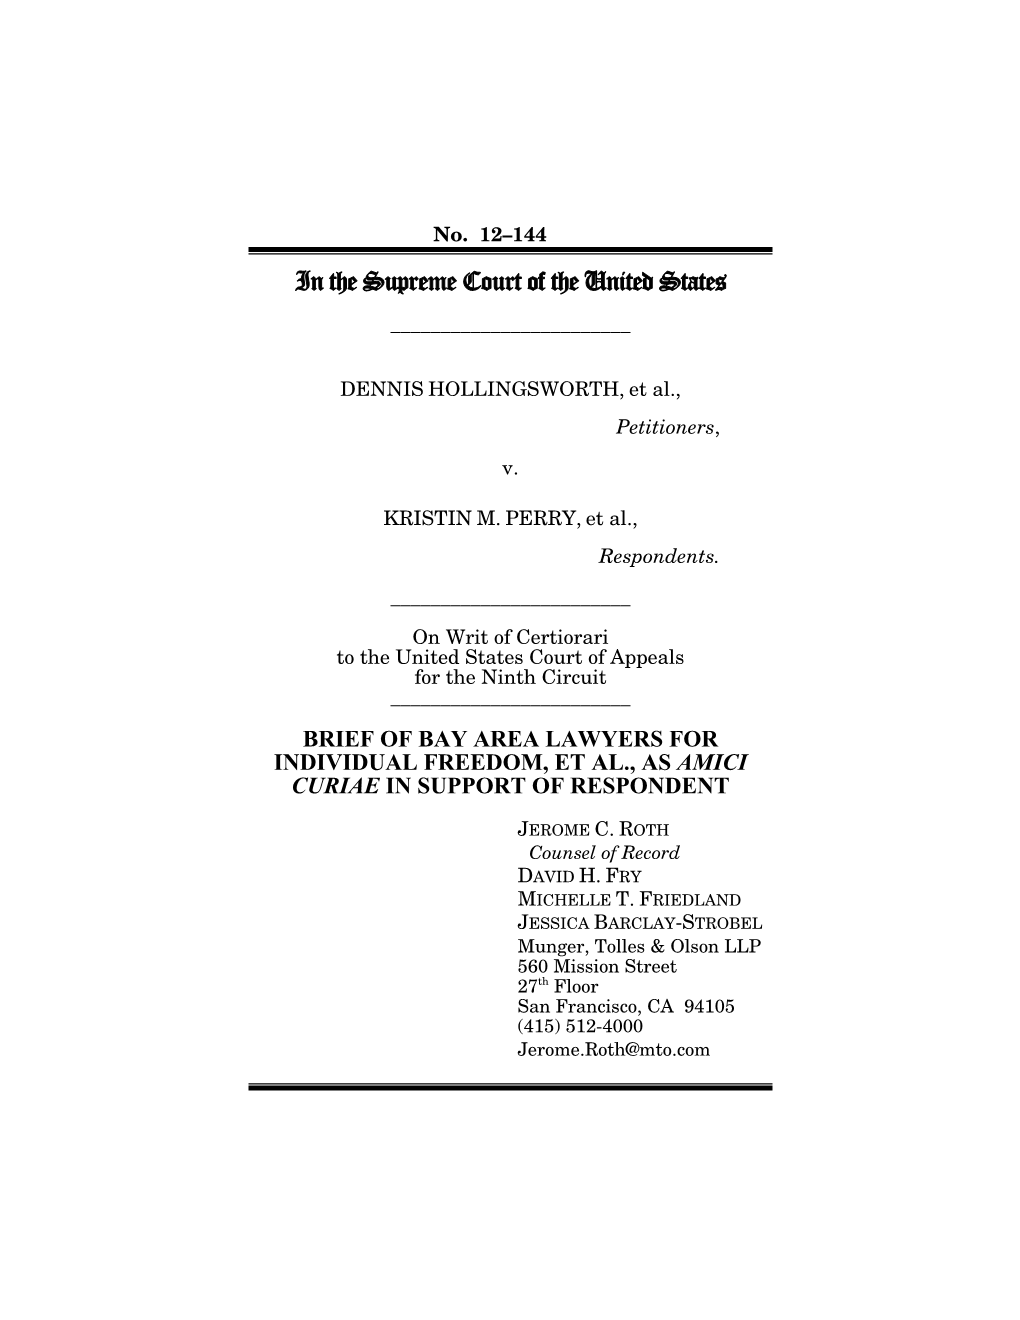 Amicus Brief Is Dedicated to Ensuring That Its Constituents and All Others in This Country, Including Gay Men and Lesbians, Receive Equal Treatment Under the Law